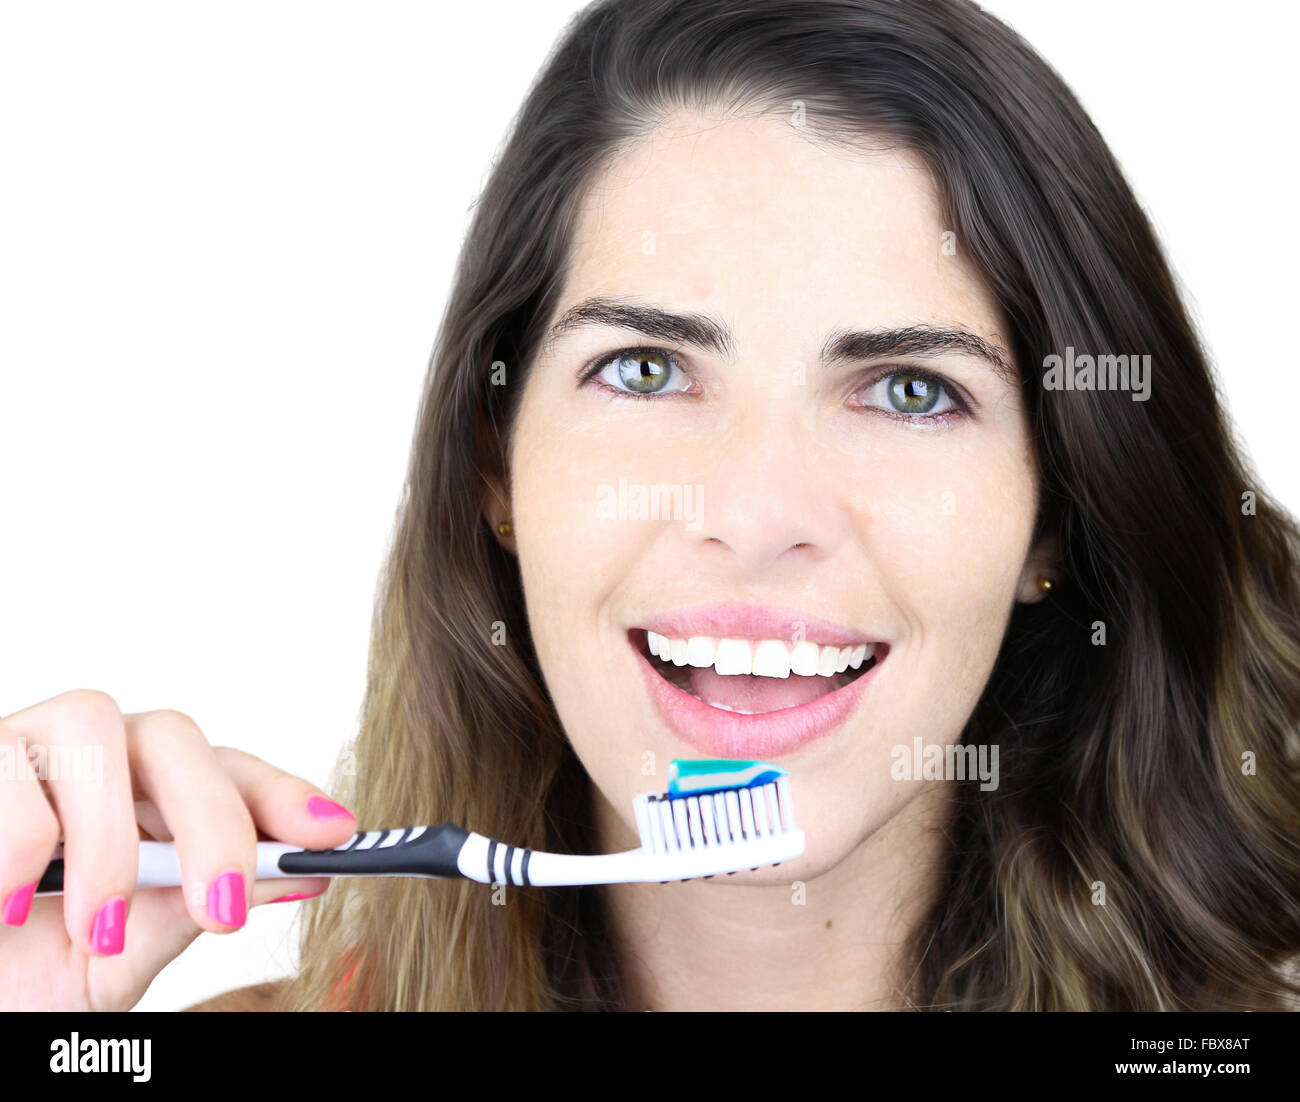 She's all about dental hygiene Stock Photo